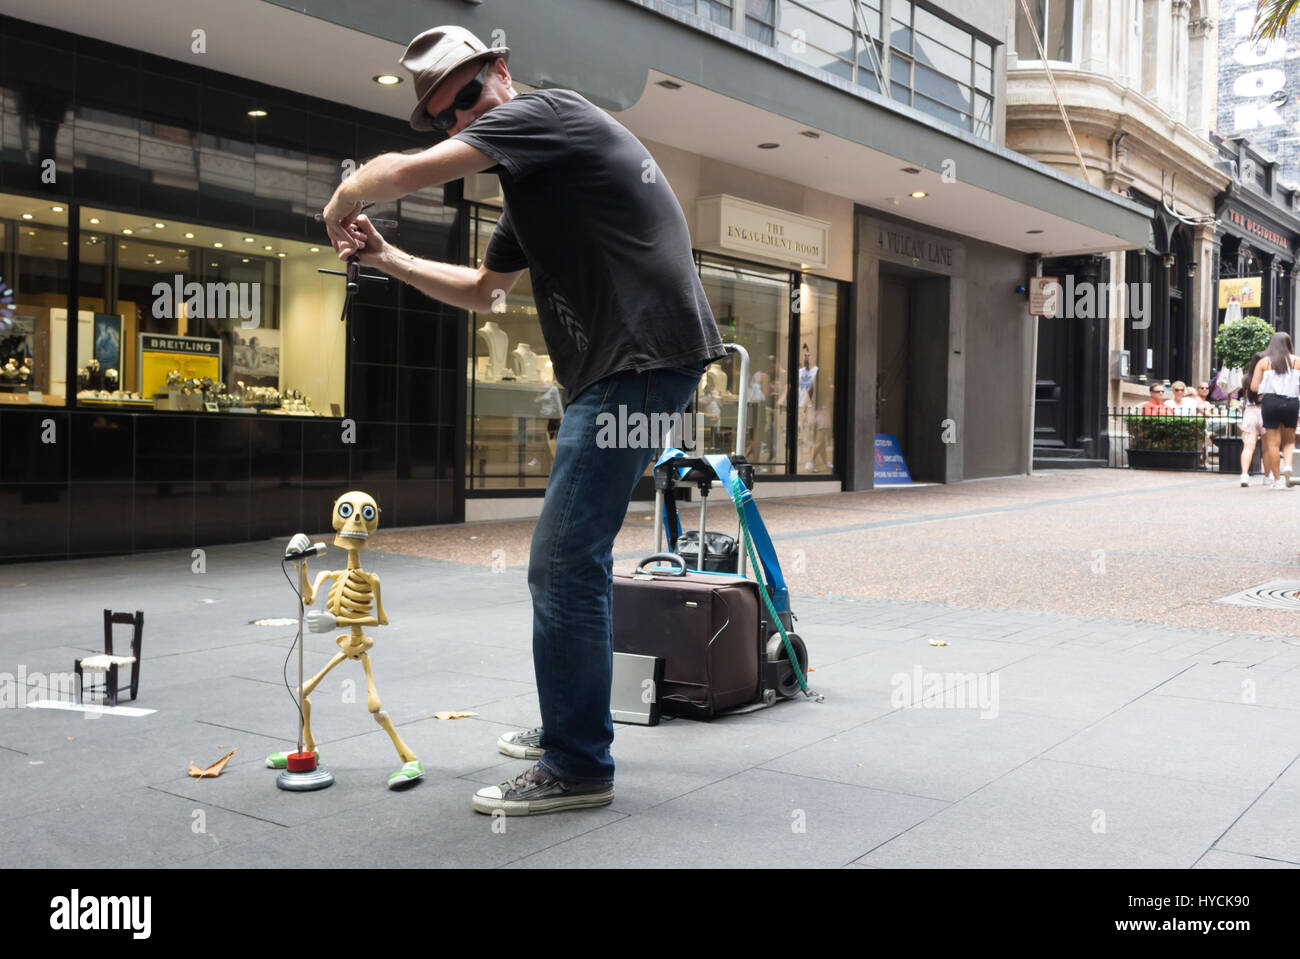 Auckland - February 17, 2017: A man is playing with his skeleton marionette on the street. Stock Photo